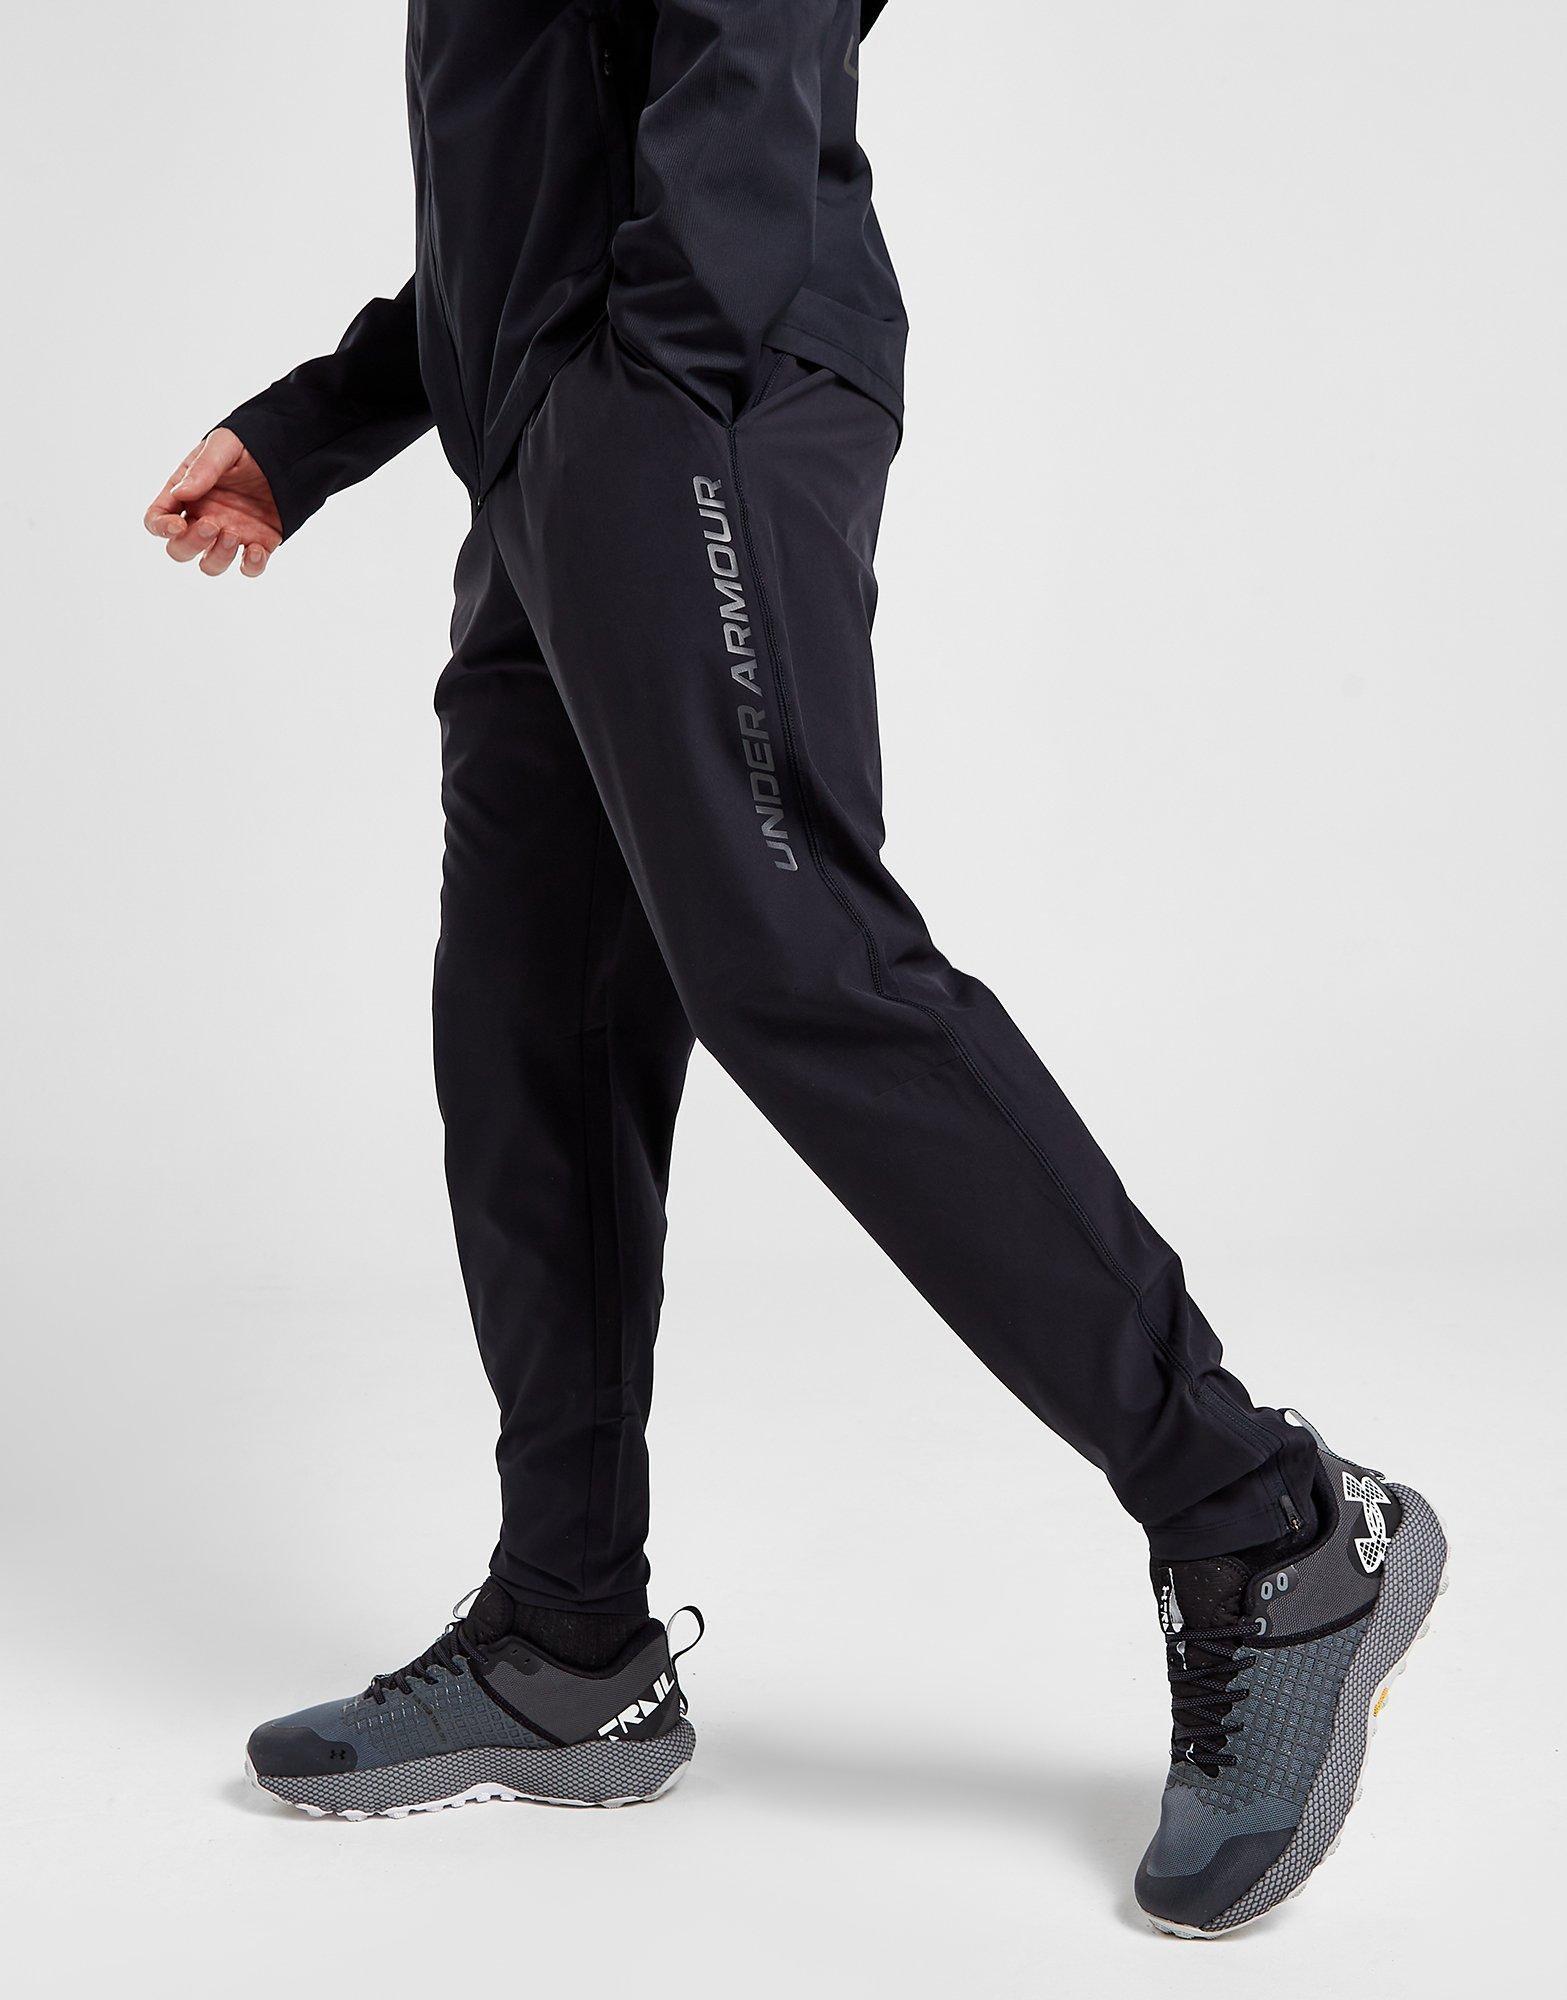  Under Armour Men's Storm Run Pants, Black (001)/Reflective,  Small : Clothing, Shoes & Jewelry